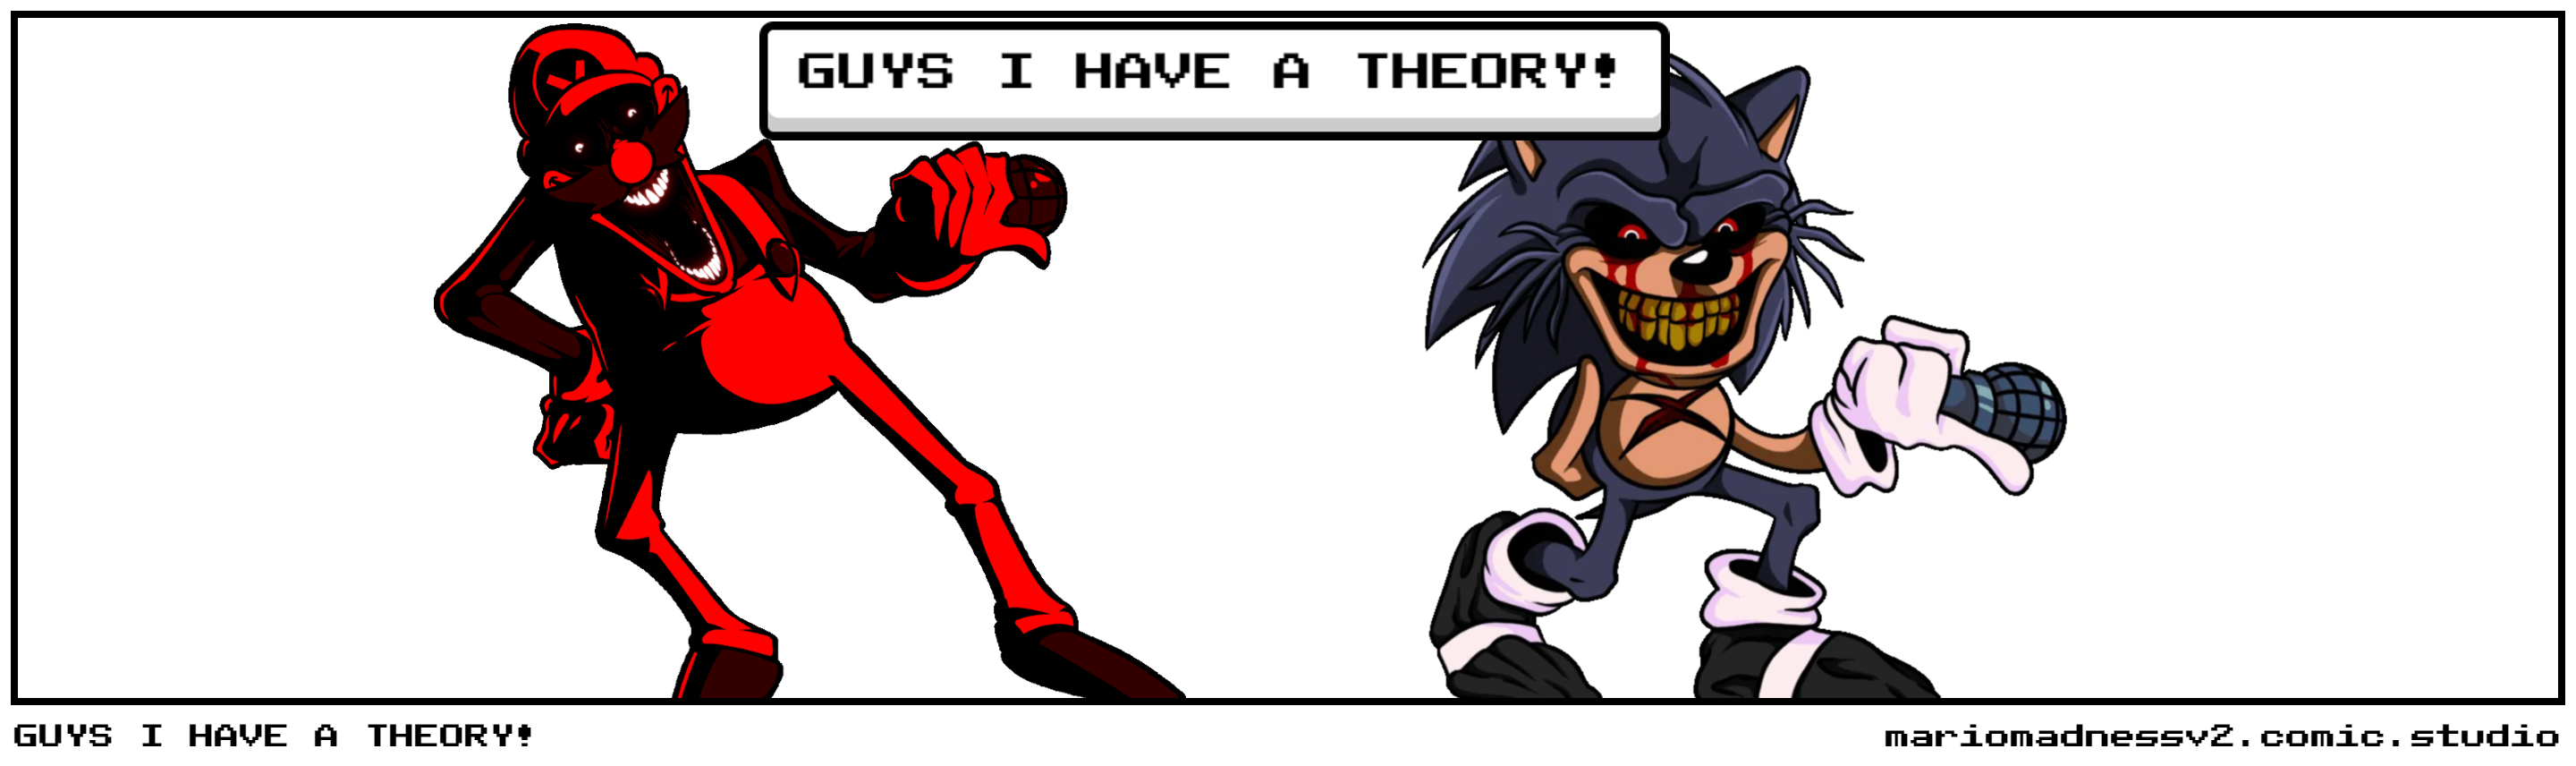 GUYS I HAVE A THEORY!